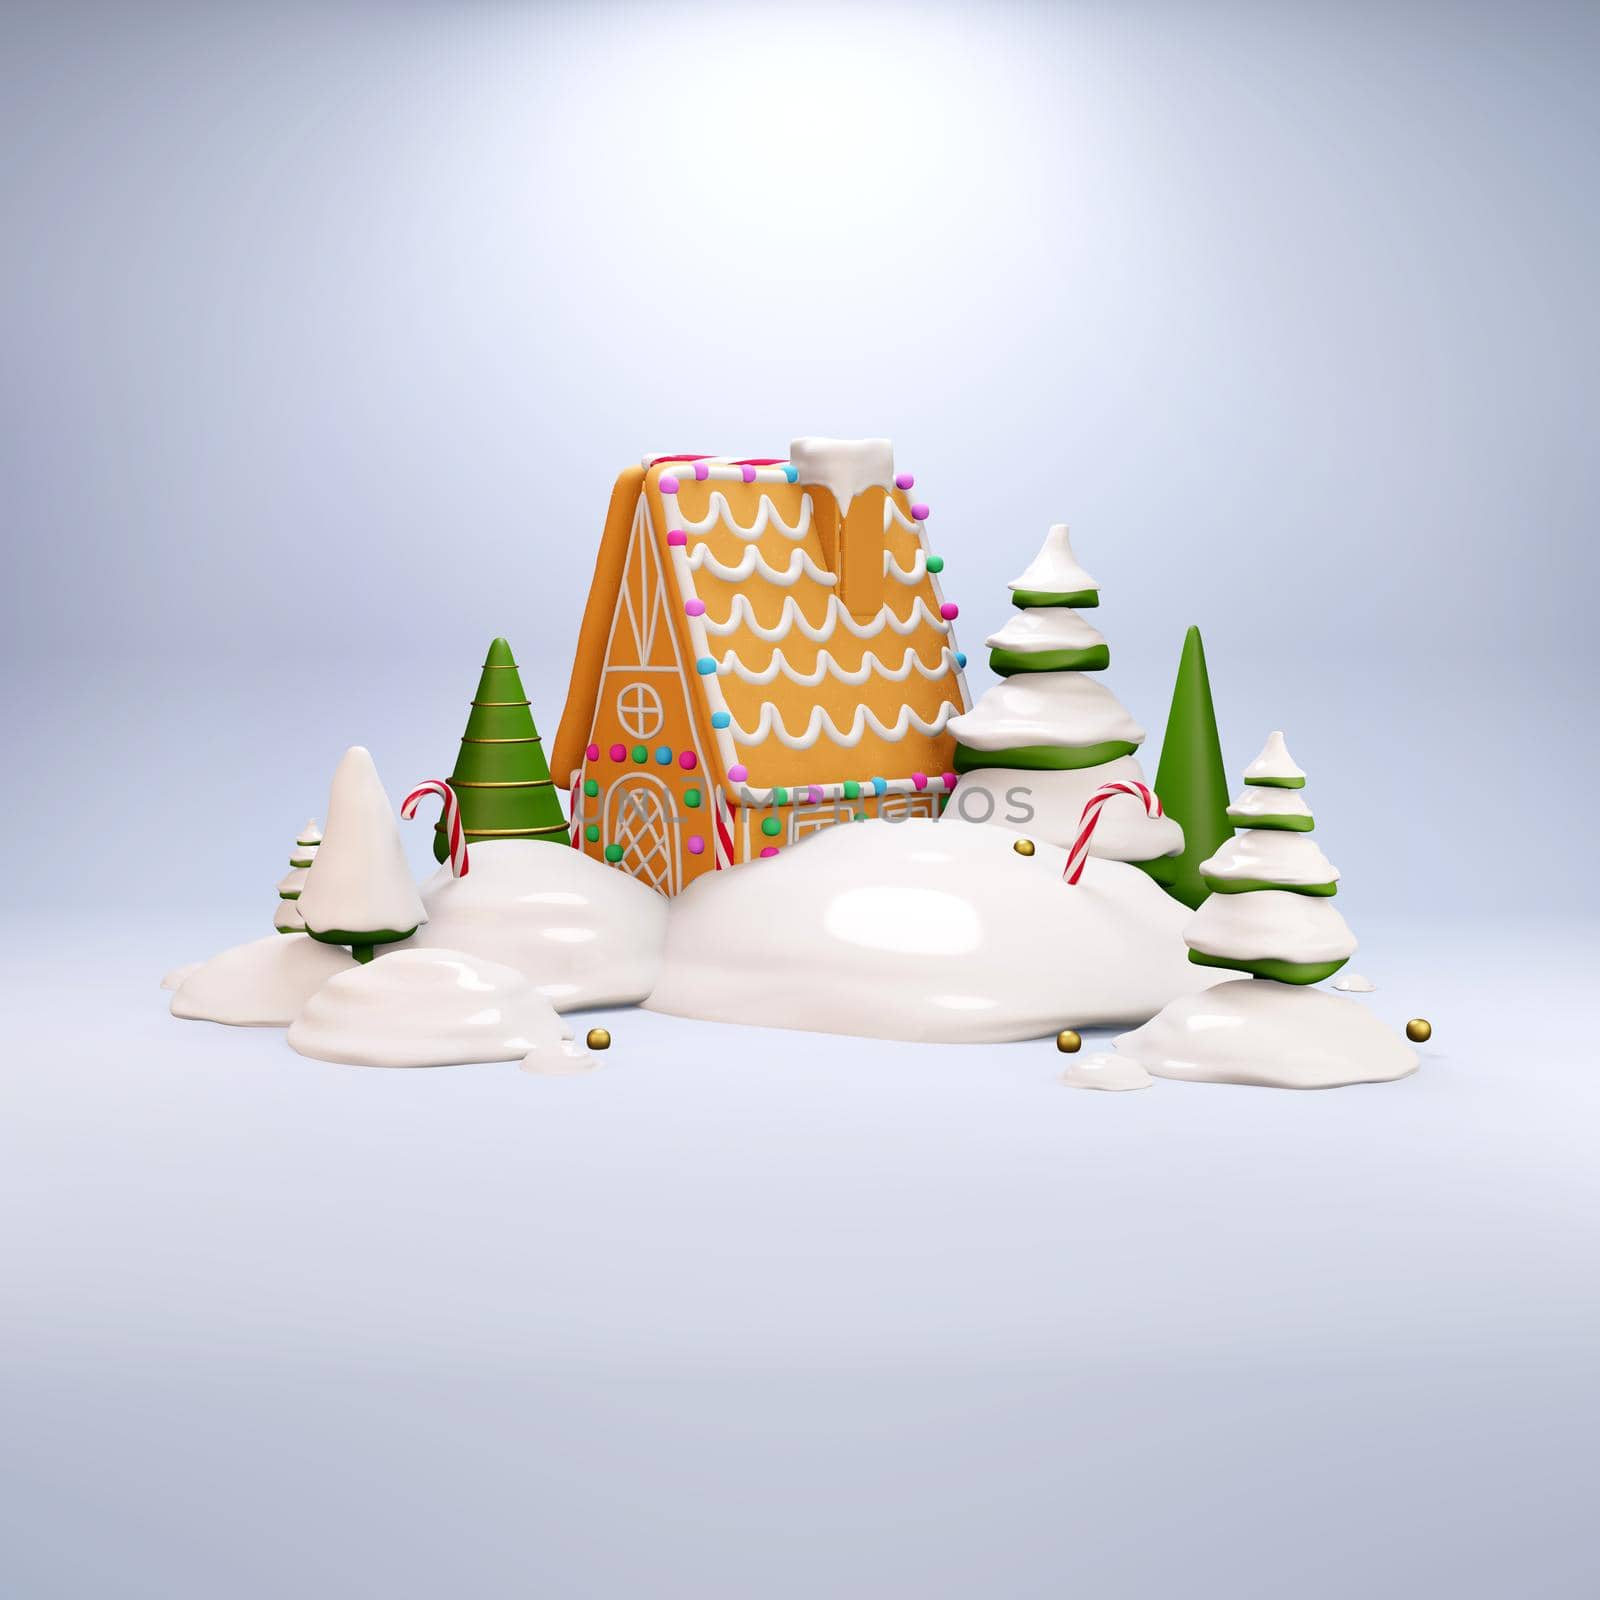 New 2022 Year is coming. Gingerbread house, christmas tree in snow on ligth blue background. Set of christmas 3d realistic icons. 3d illustration